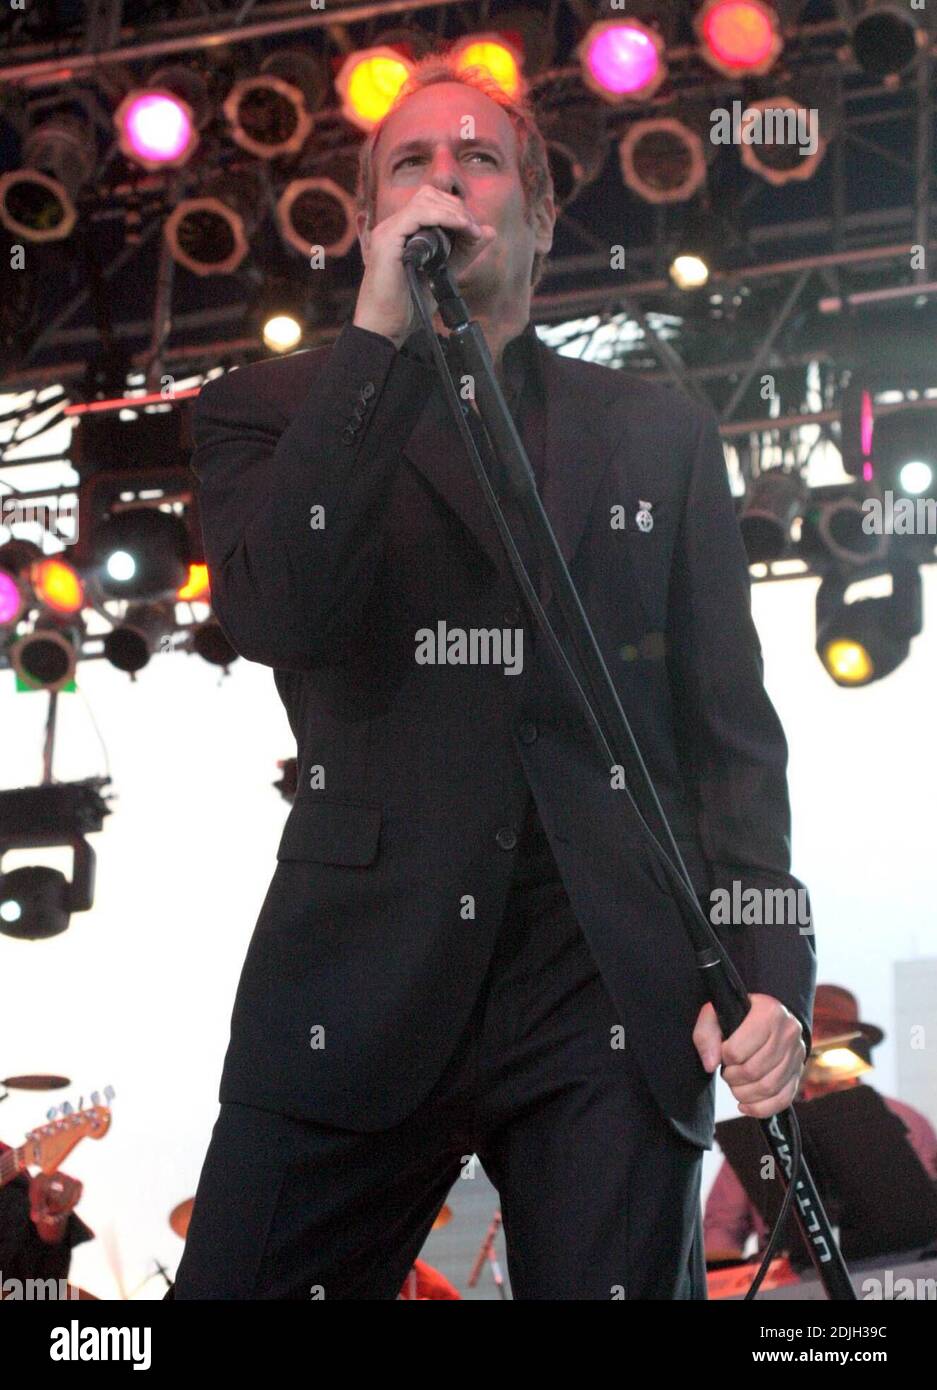 Michael Bolton performing at the Florida Sunfest Festival. 05/05/06 Stock Photo